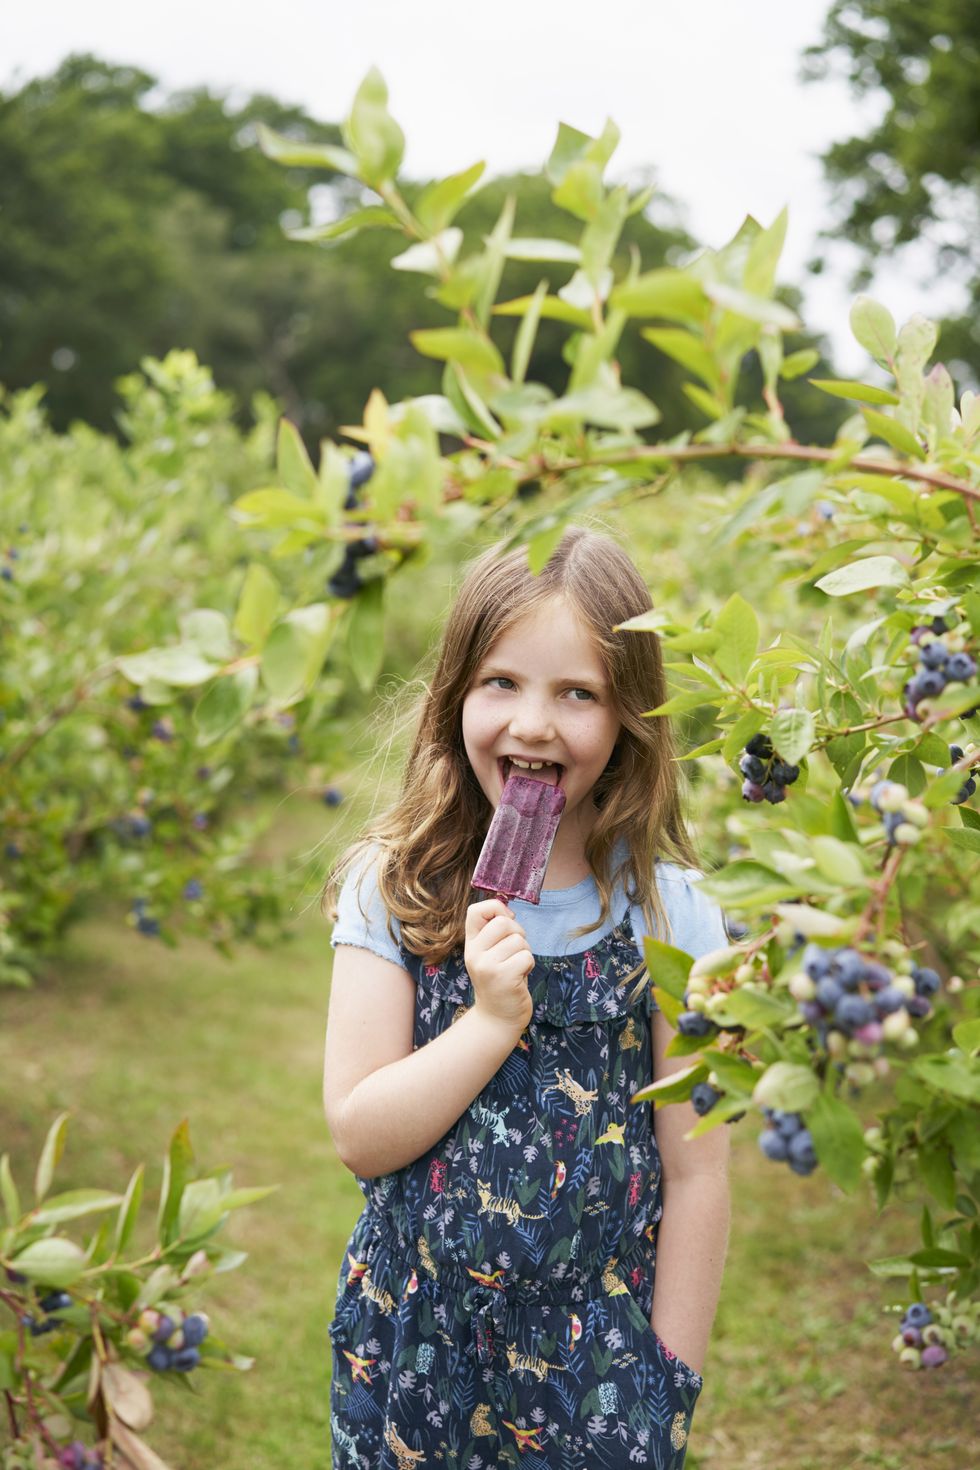 member of the benson family shown eating an ice lolly in the blueberry fields